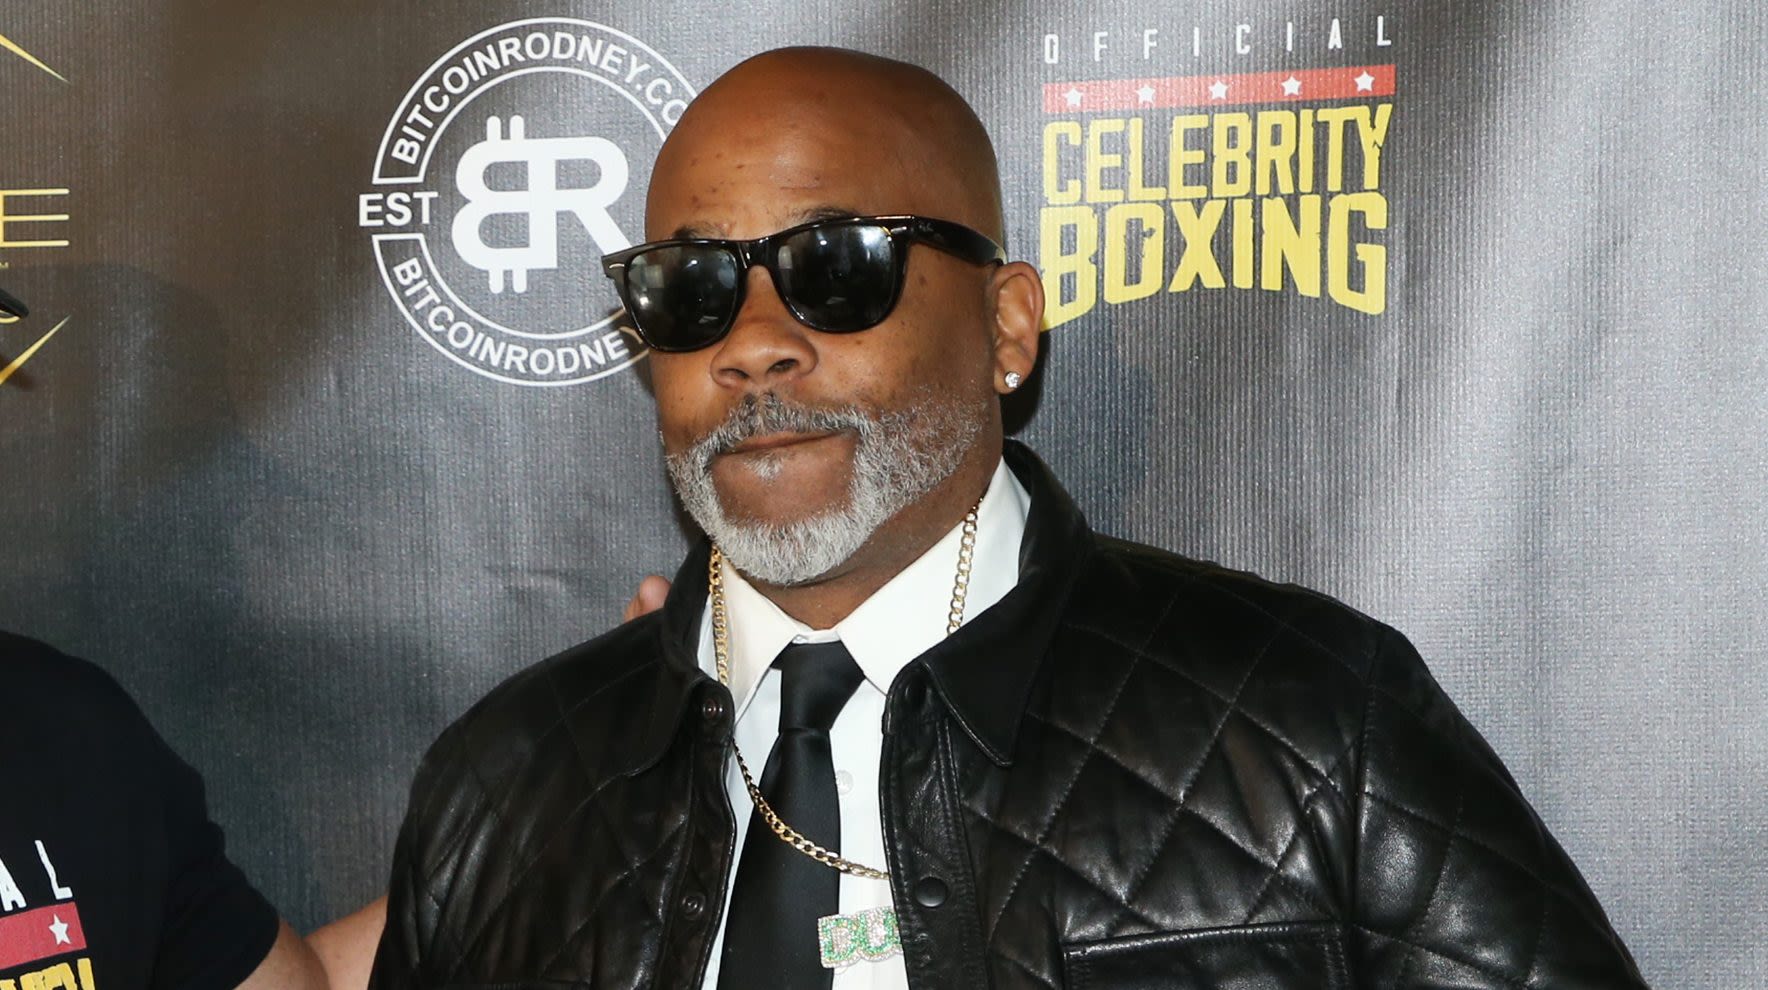 Dame Dash’s Roc-A-Fella Shares To Be Auctioned Off After Failing To Pay $800K Settlement